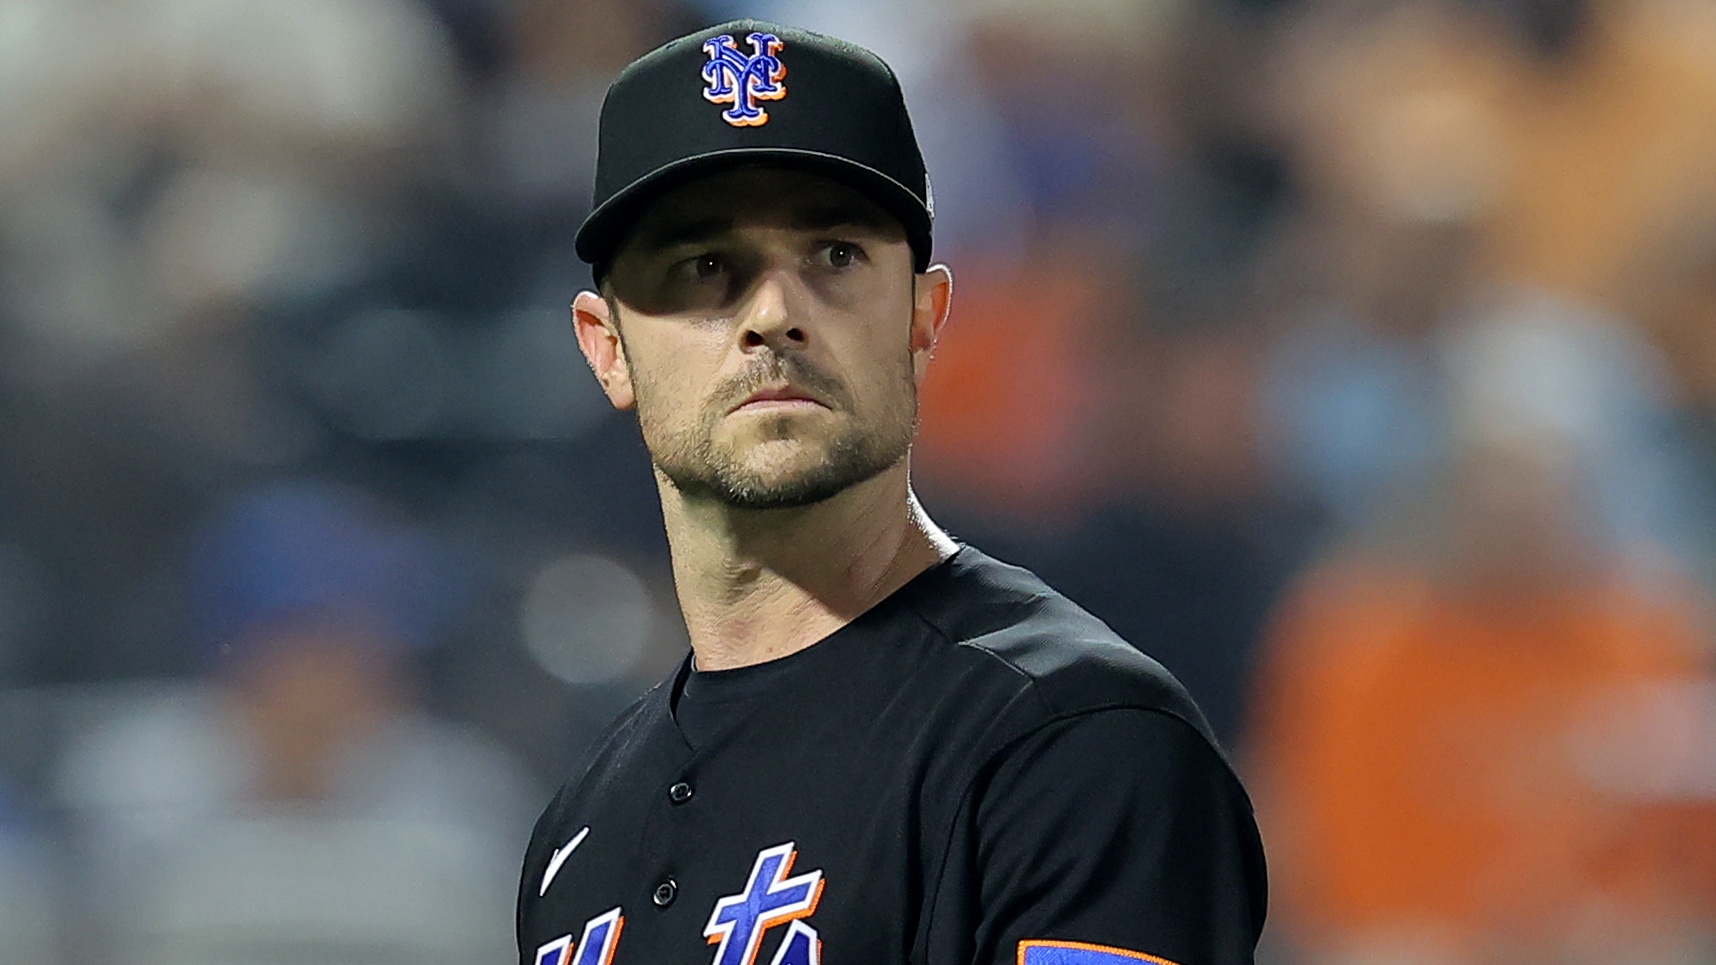 Mets trade reliever David Robertson to Marlins for 2 minor